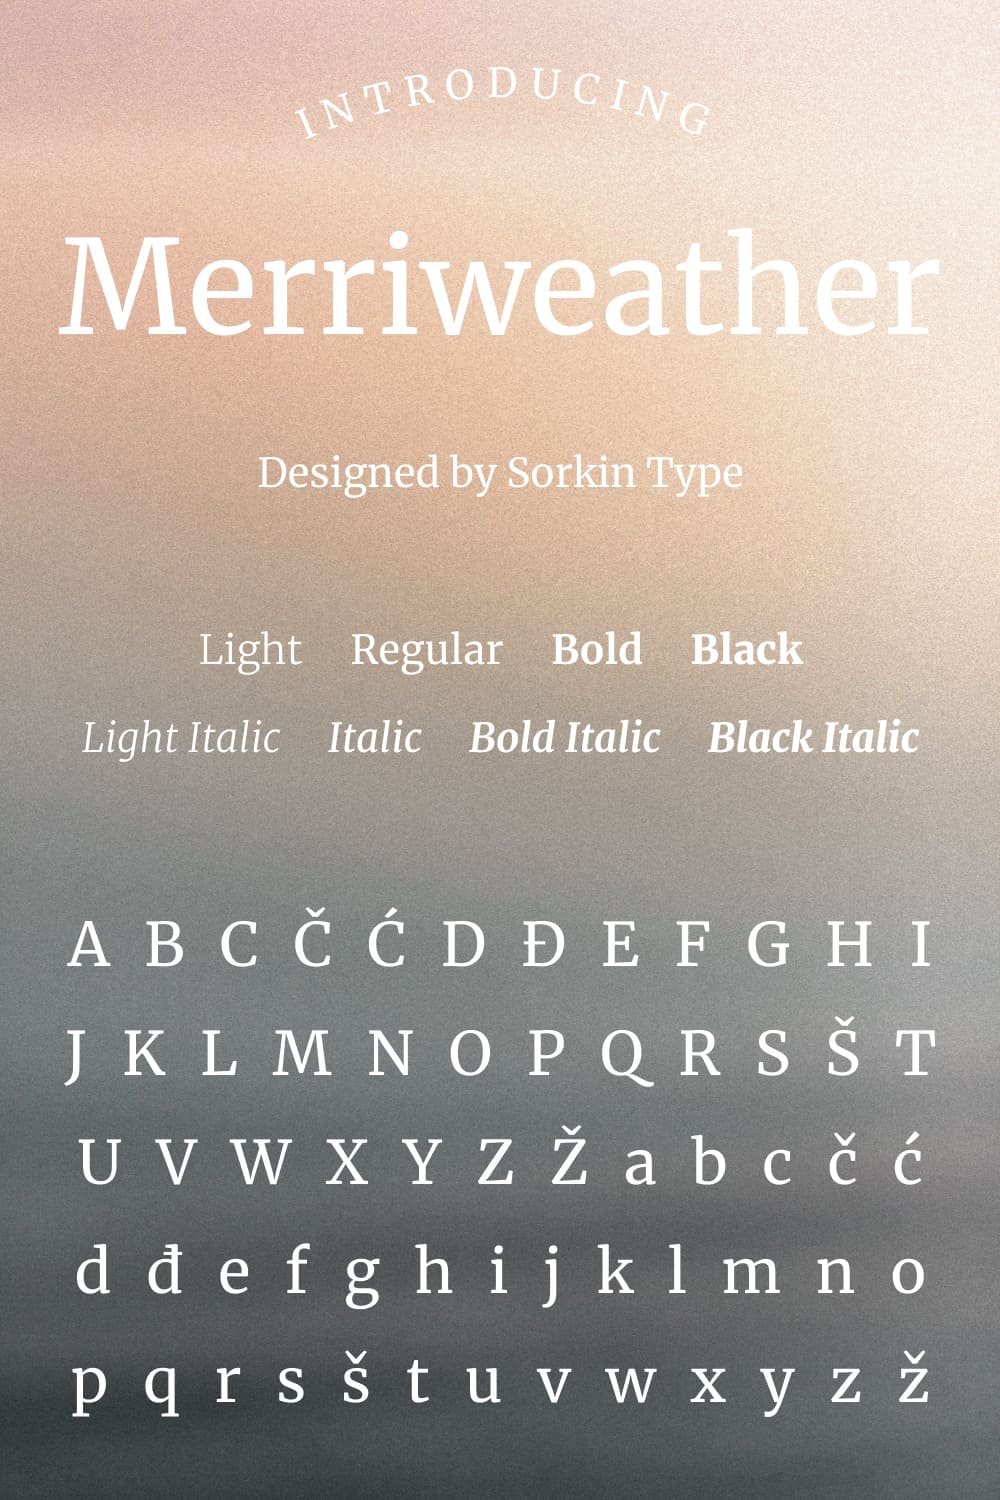 A good, versatile font available for free from Google will complement your project.